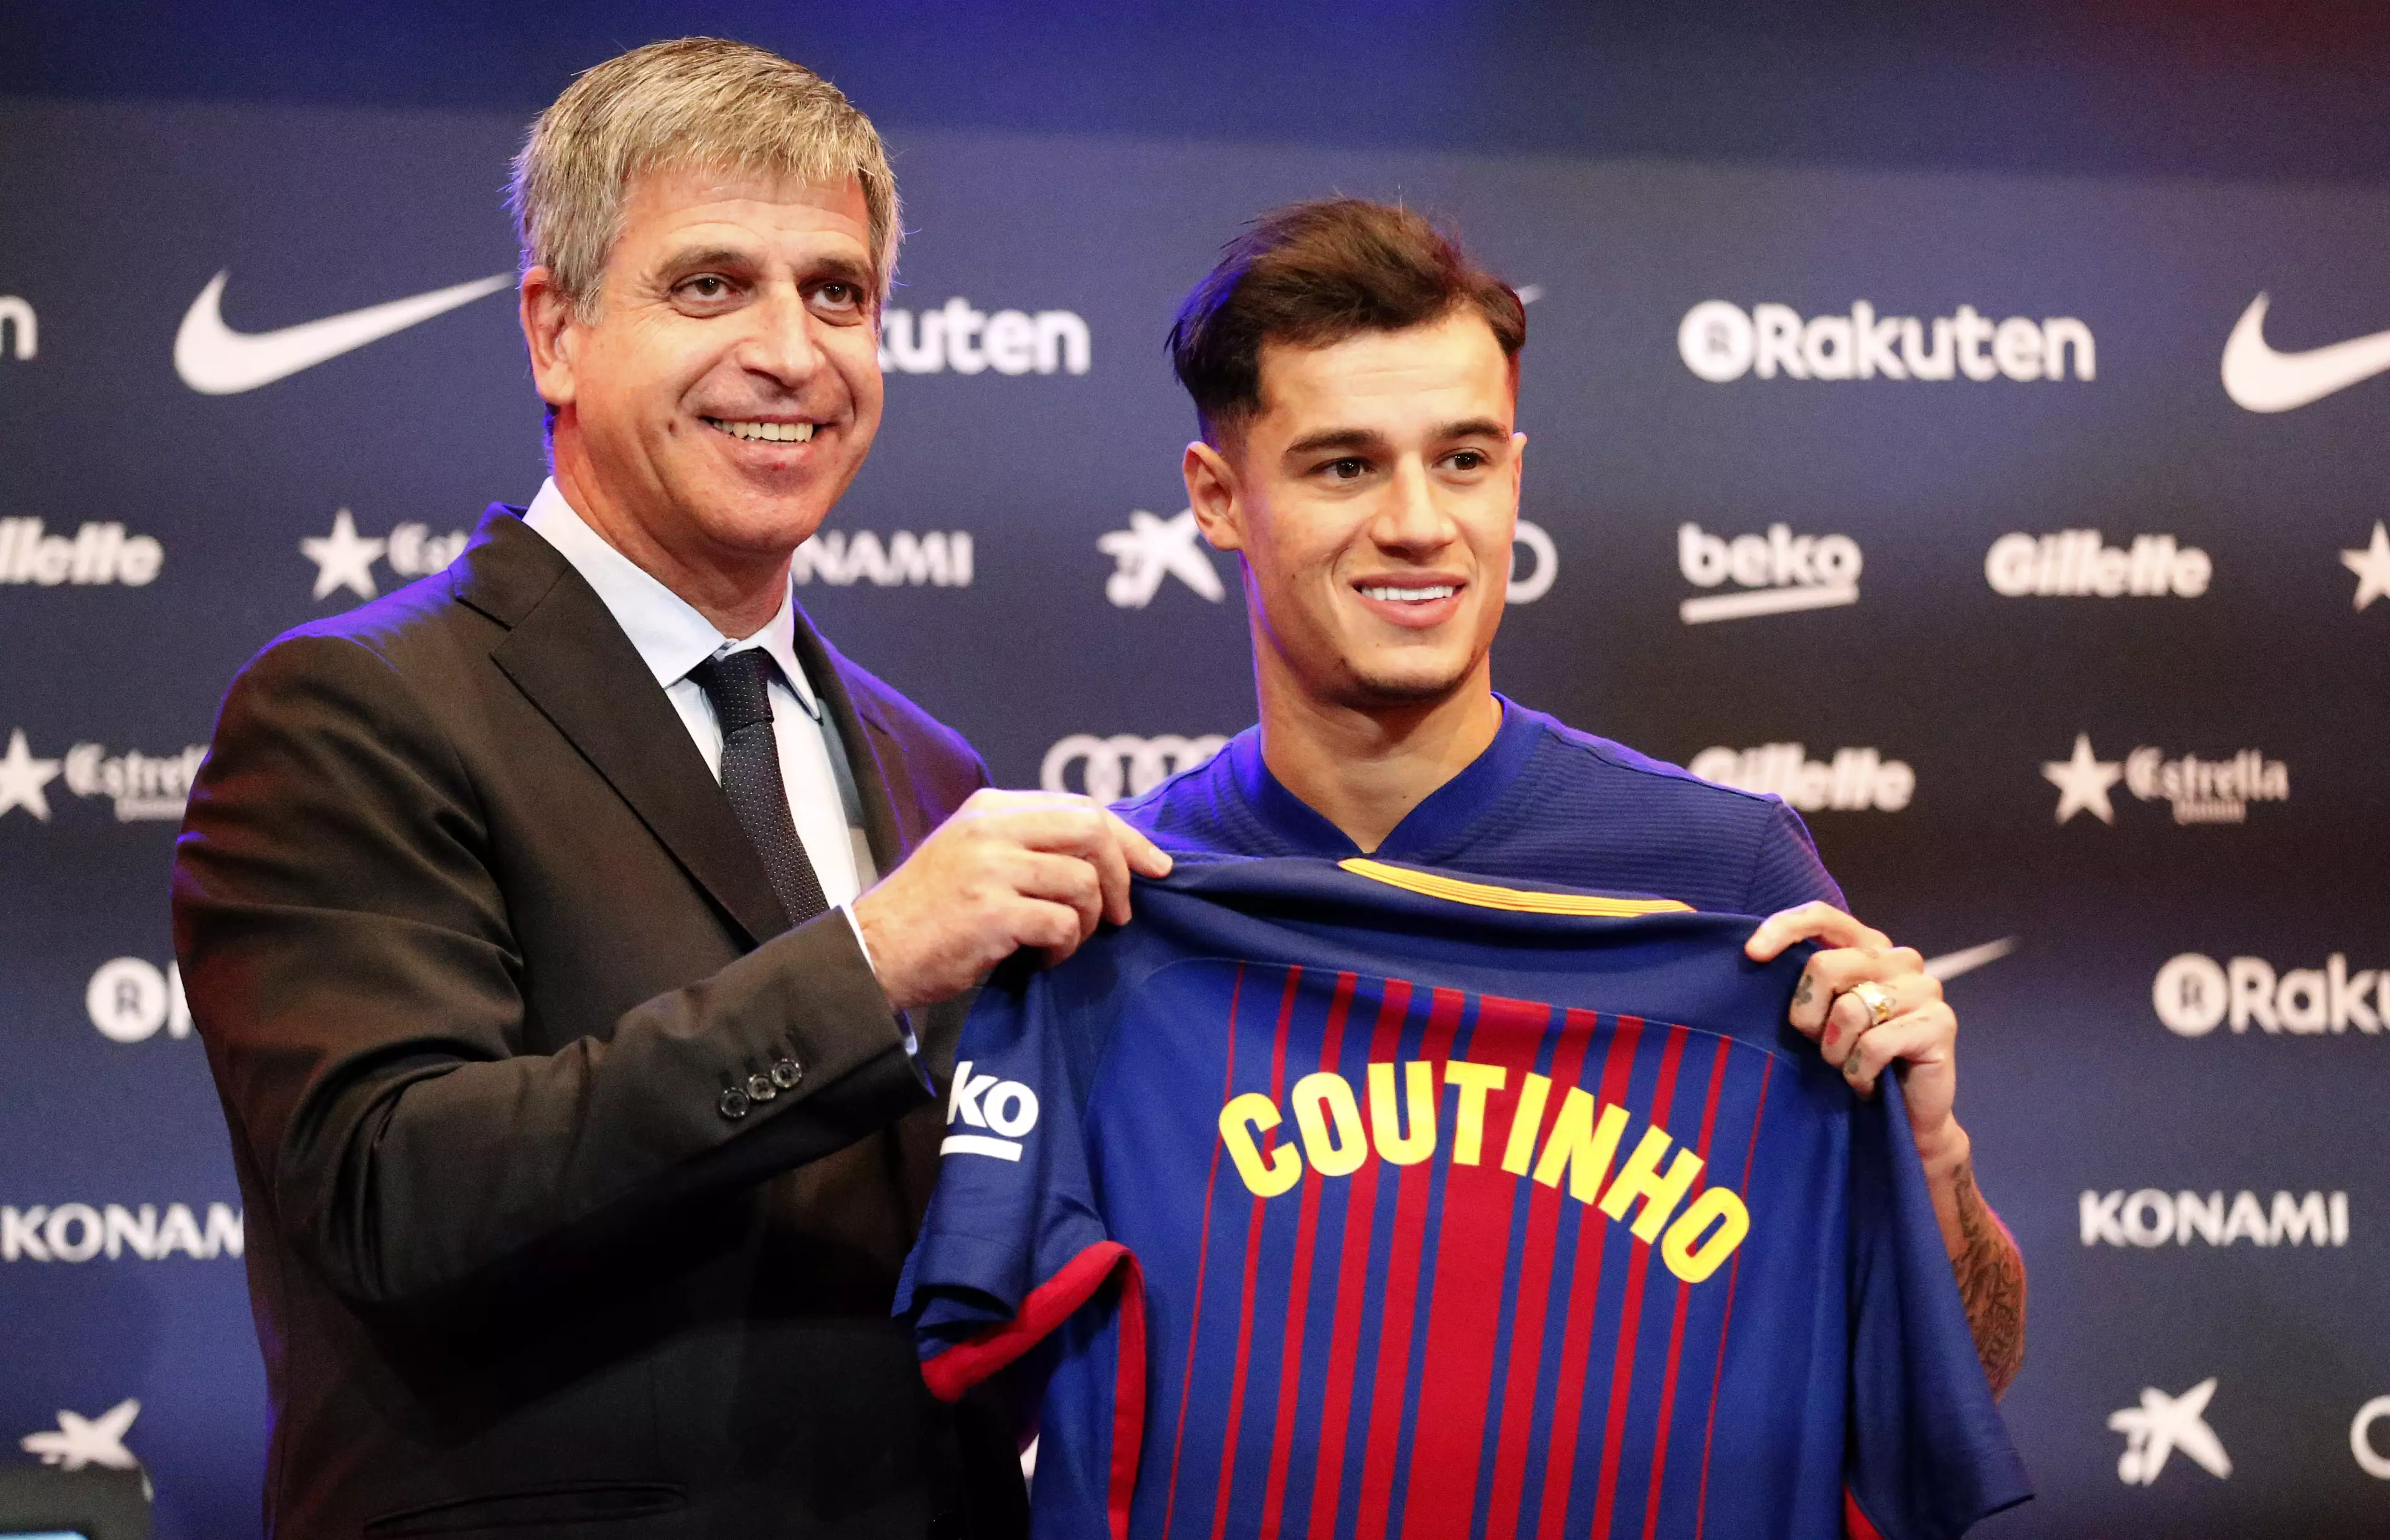 It took Coutinho ages to get his move. Image: PA Images